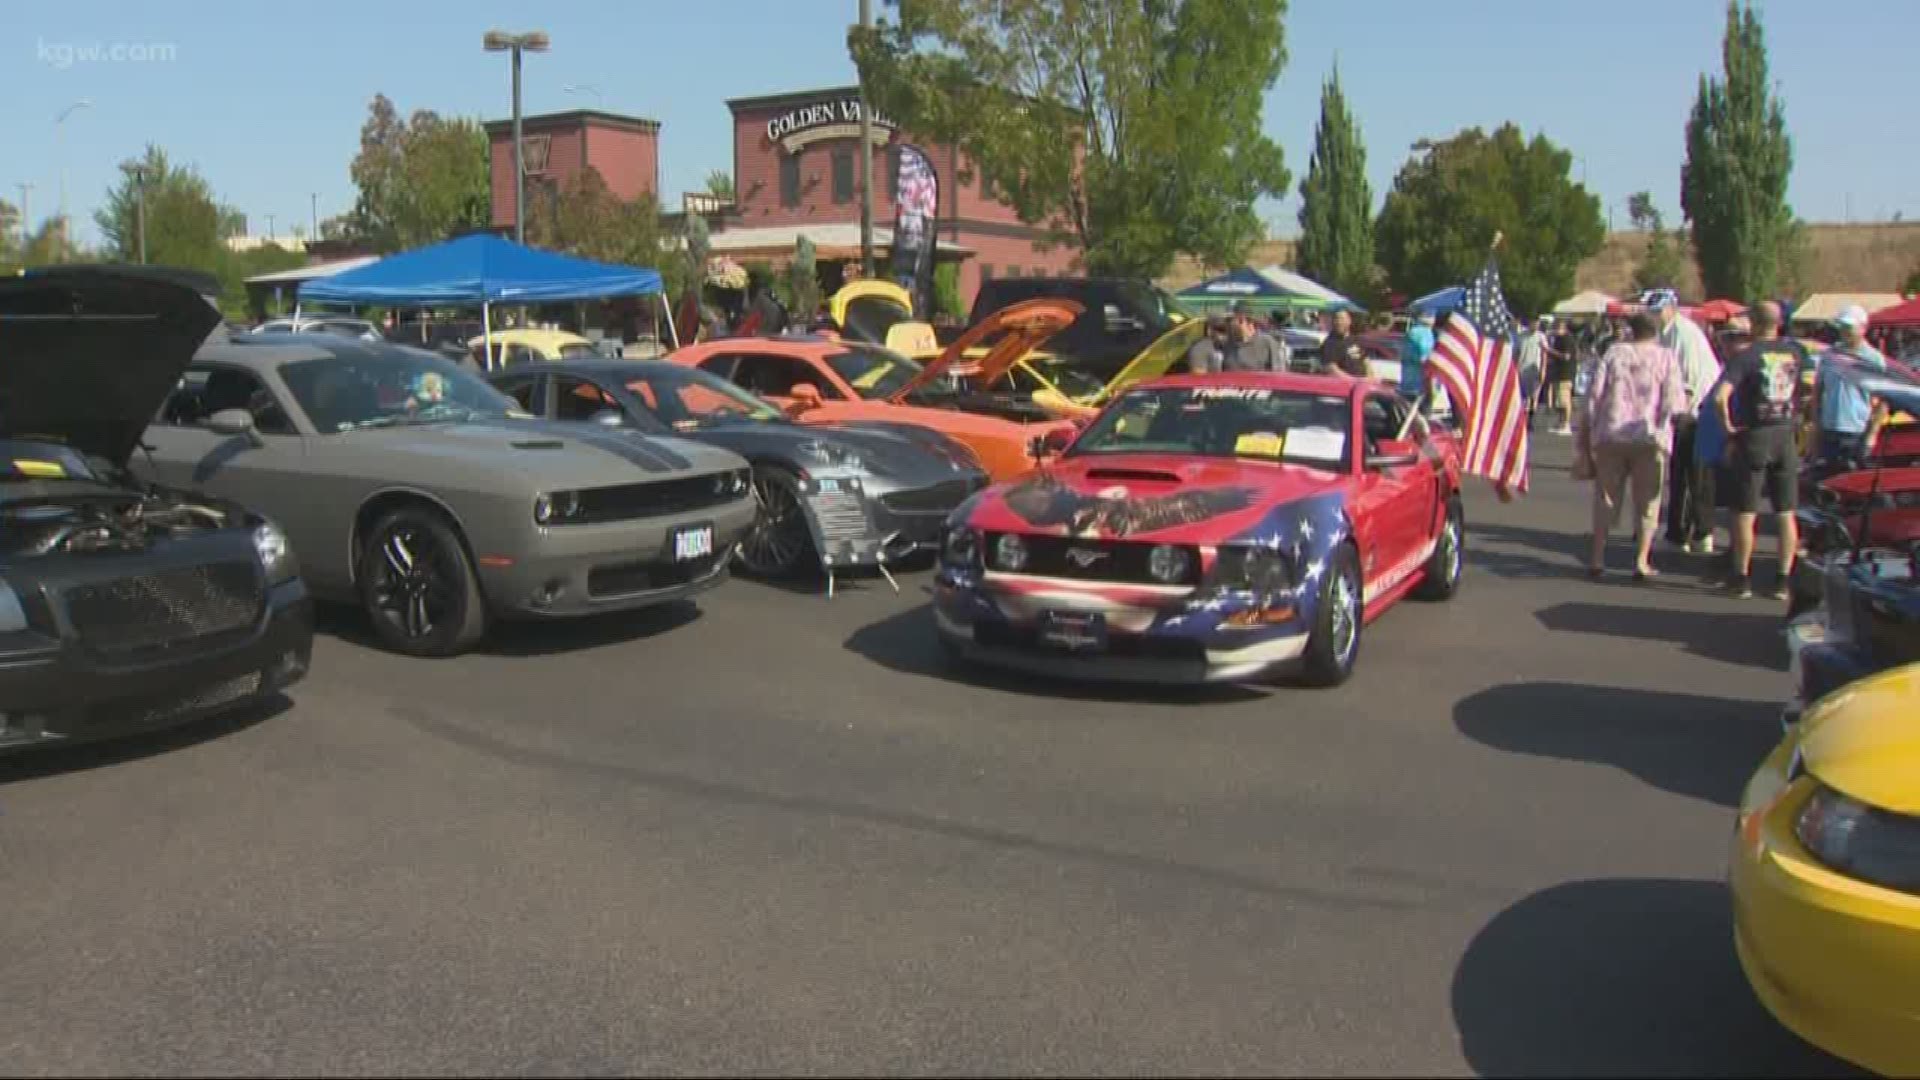 Kyron Horman went missing in 2010, but his family hasn’t given up hope. On Sunday, people came together for an annual event to raise awareness about Kyron’s case and other missing children. At the 8th annual Kyron’s Car Show, his father said the investigation into his son’s disappearance is still very active, and he hopes events like these will continue to remind people that they’re still looking for Kyron.